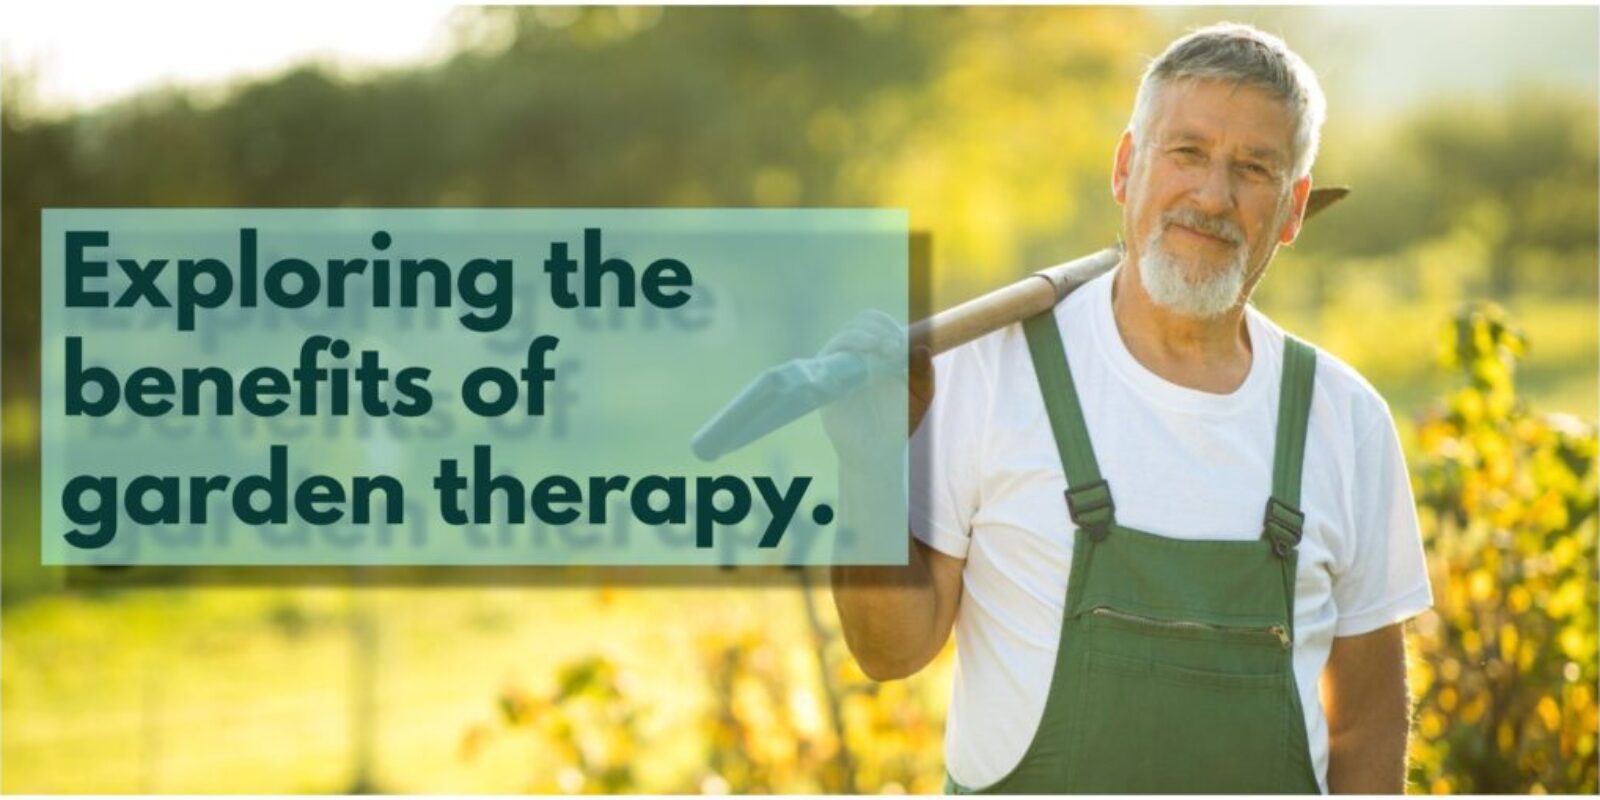 Garden Therapy: The Benefits of Easy Gardening for Seniors